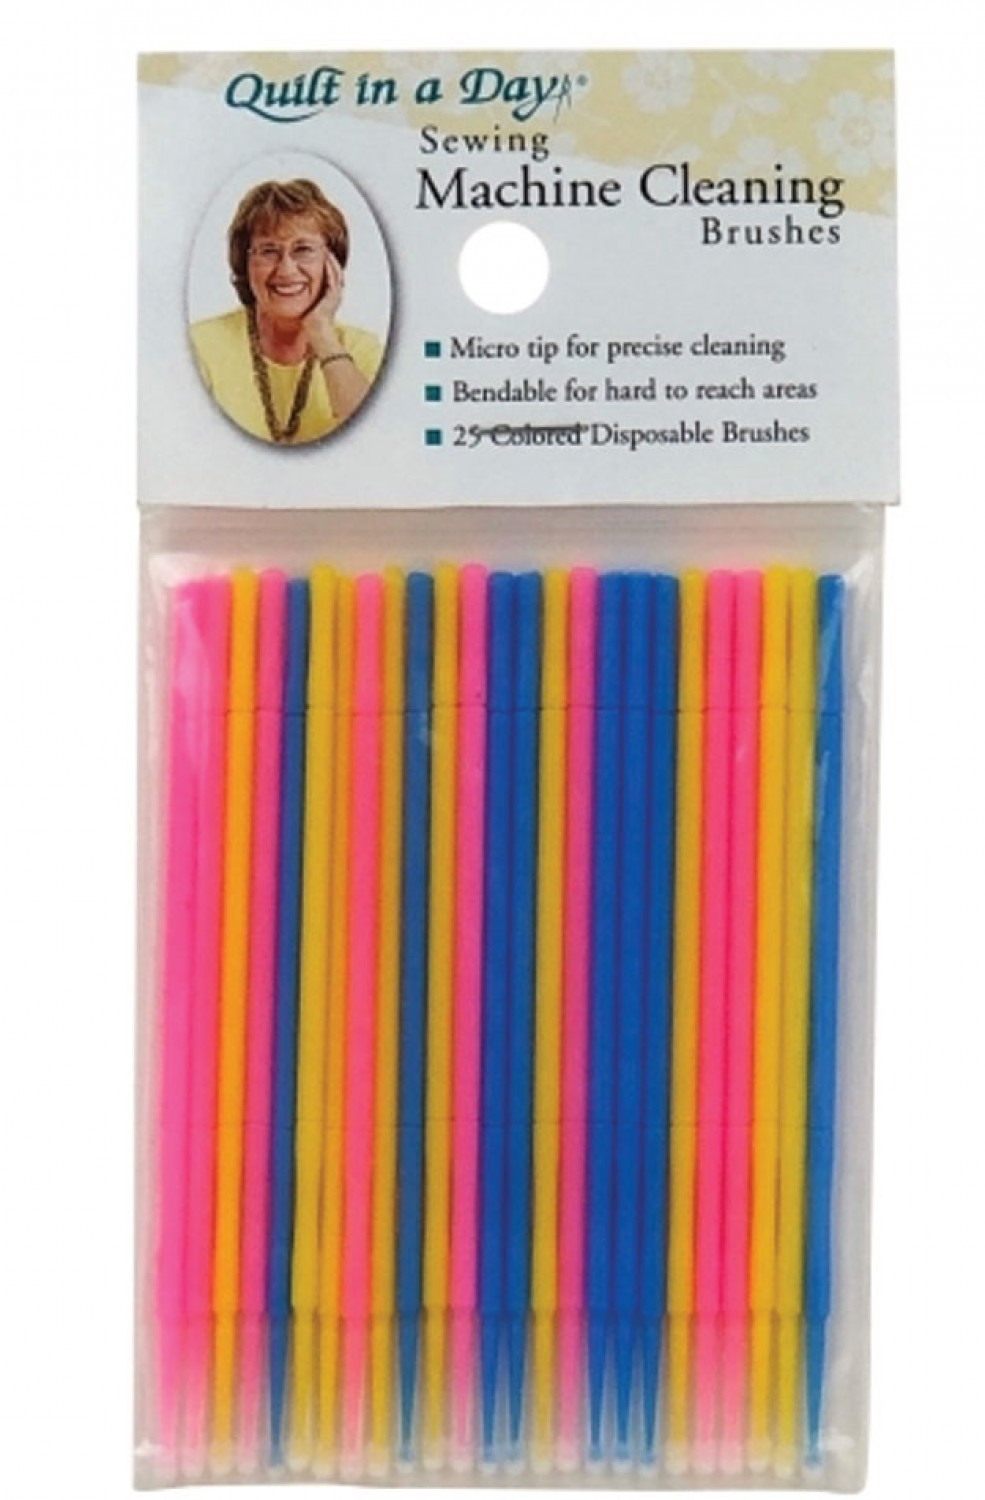 Sewing Machine Cleaning Brushes (25 ct)